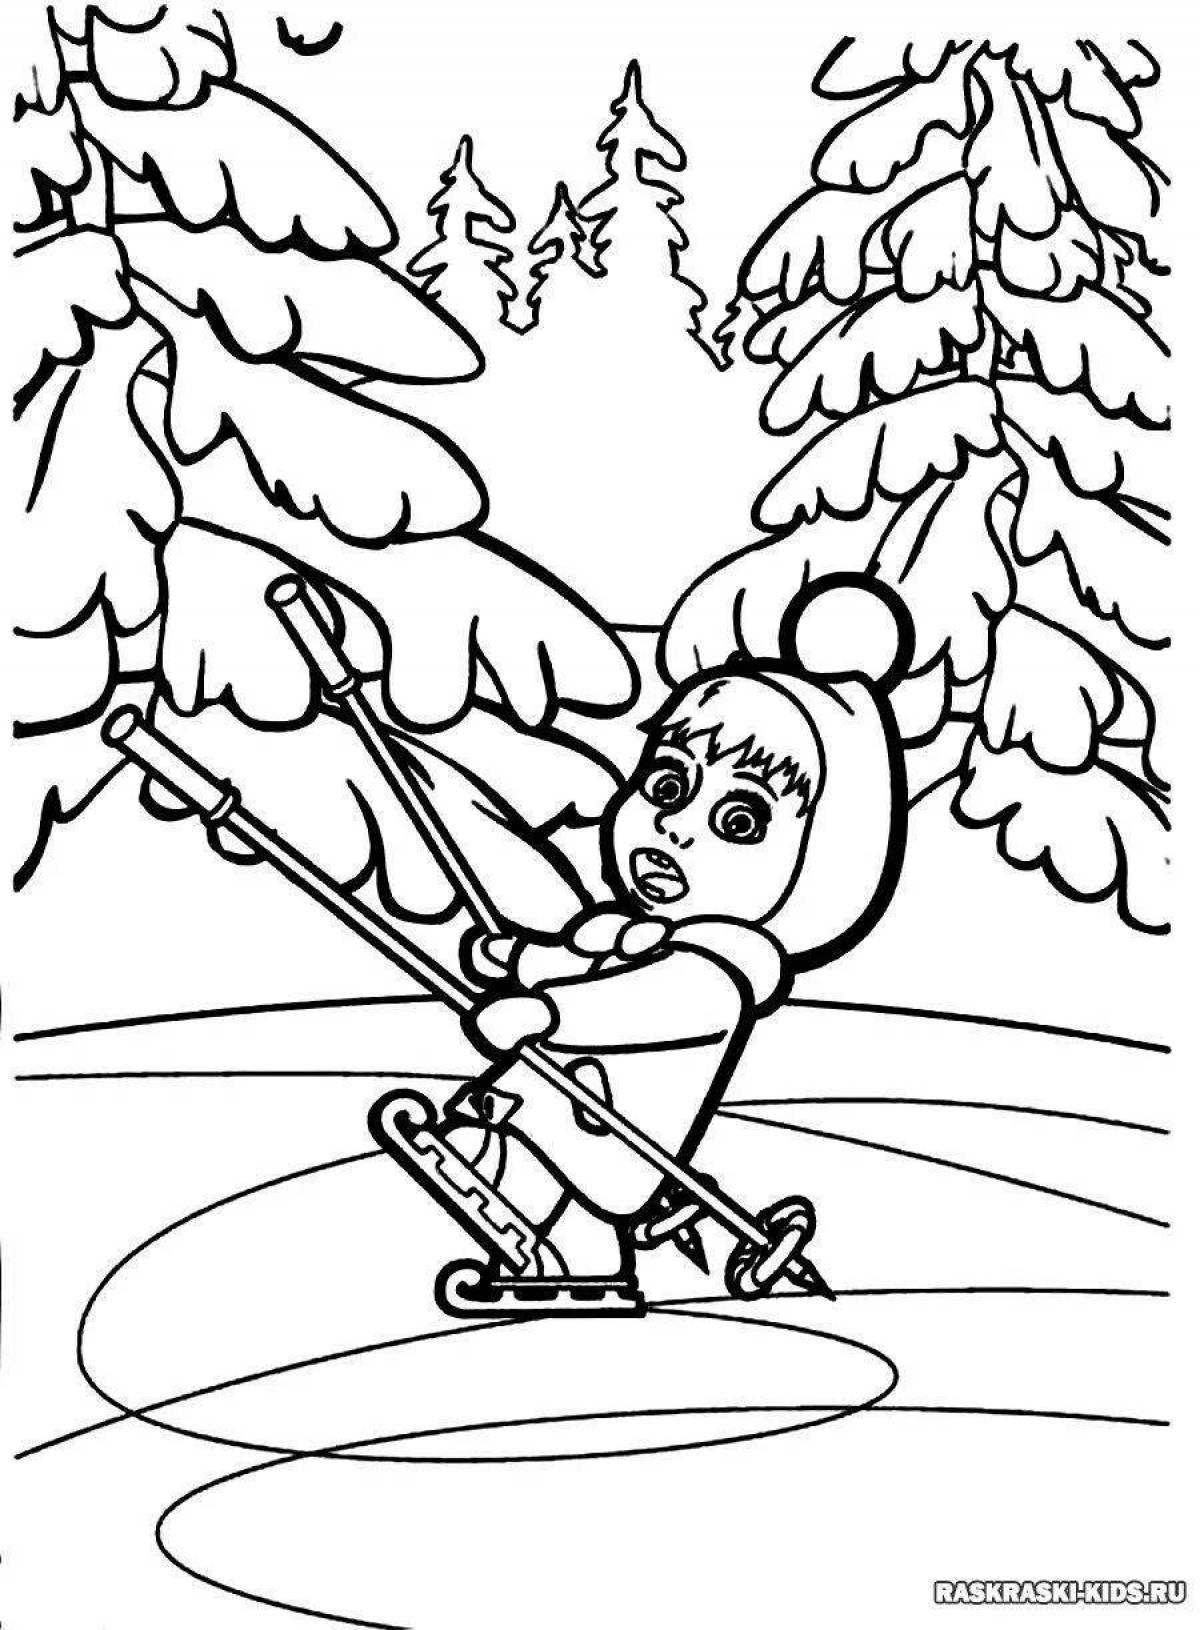 Intriguing Ice Safety Coloring Page